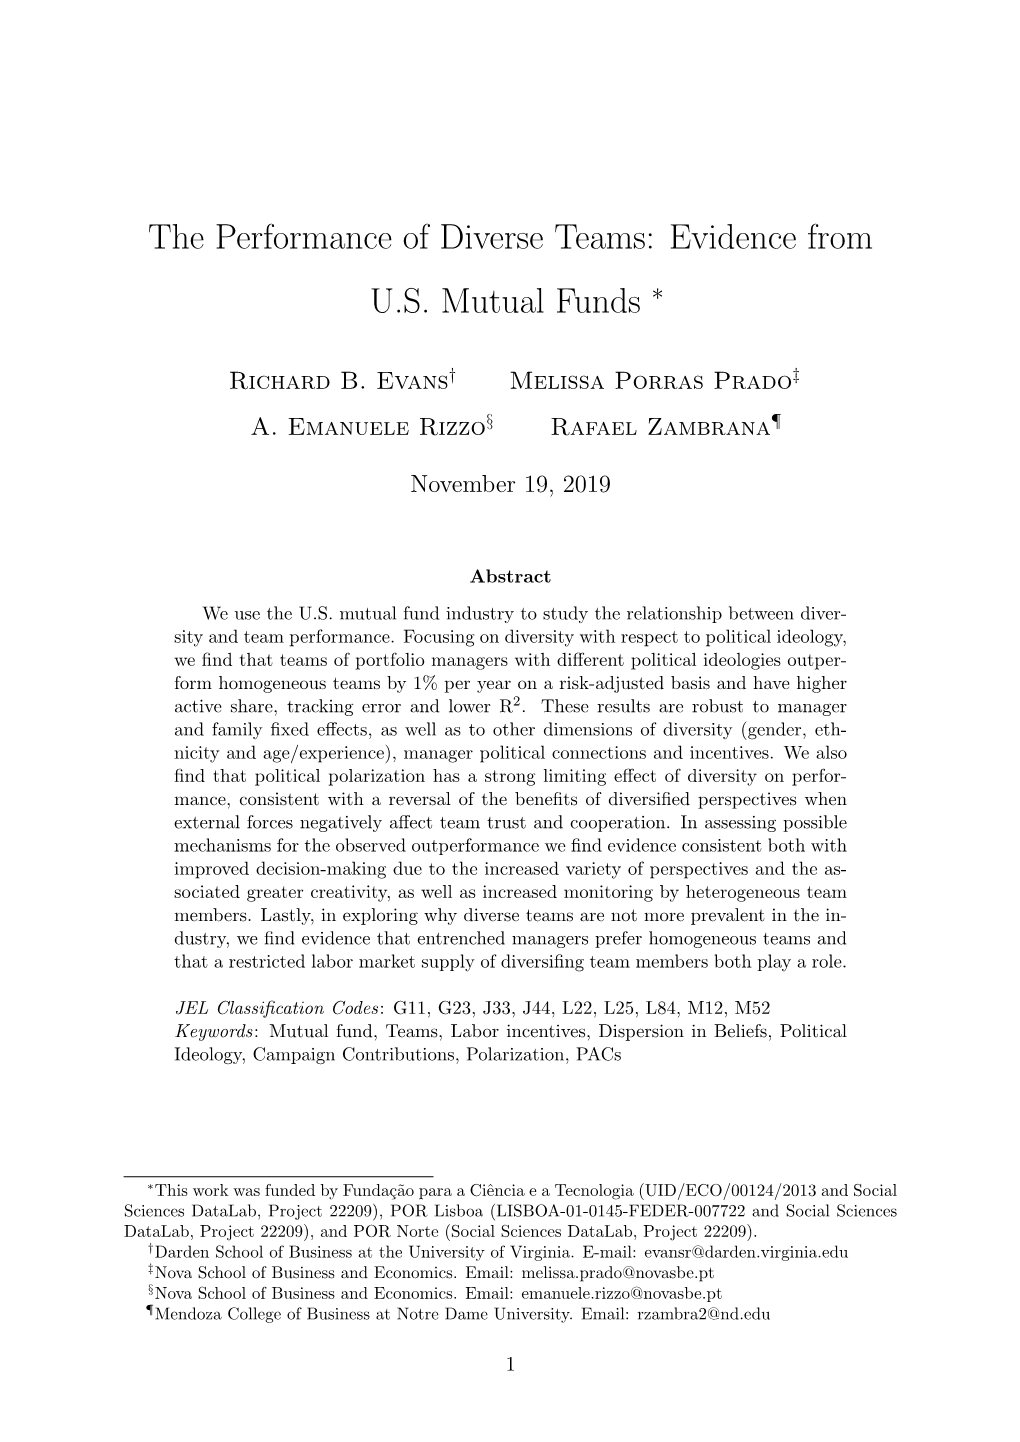 The Performance of Diverse Teams: Evidence from U.S. Mutual Funds ∗